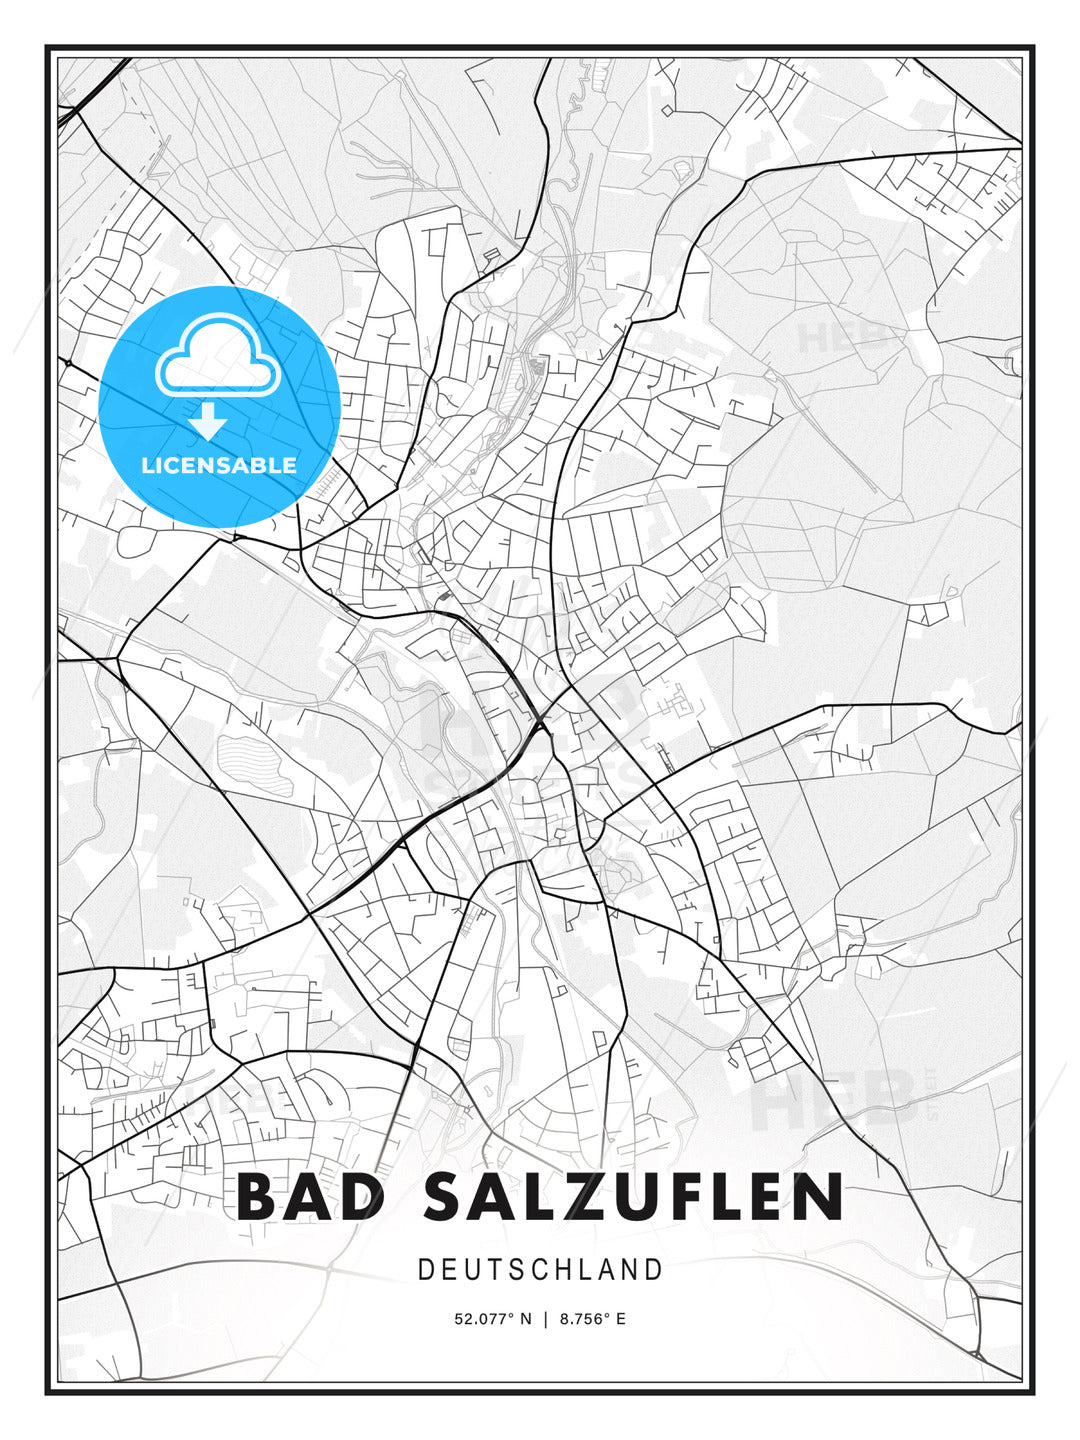 Bad Salzuflen, Germany, Modern Print Template in Various Formats - HEBSTREITS Sketches